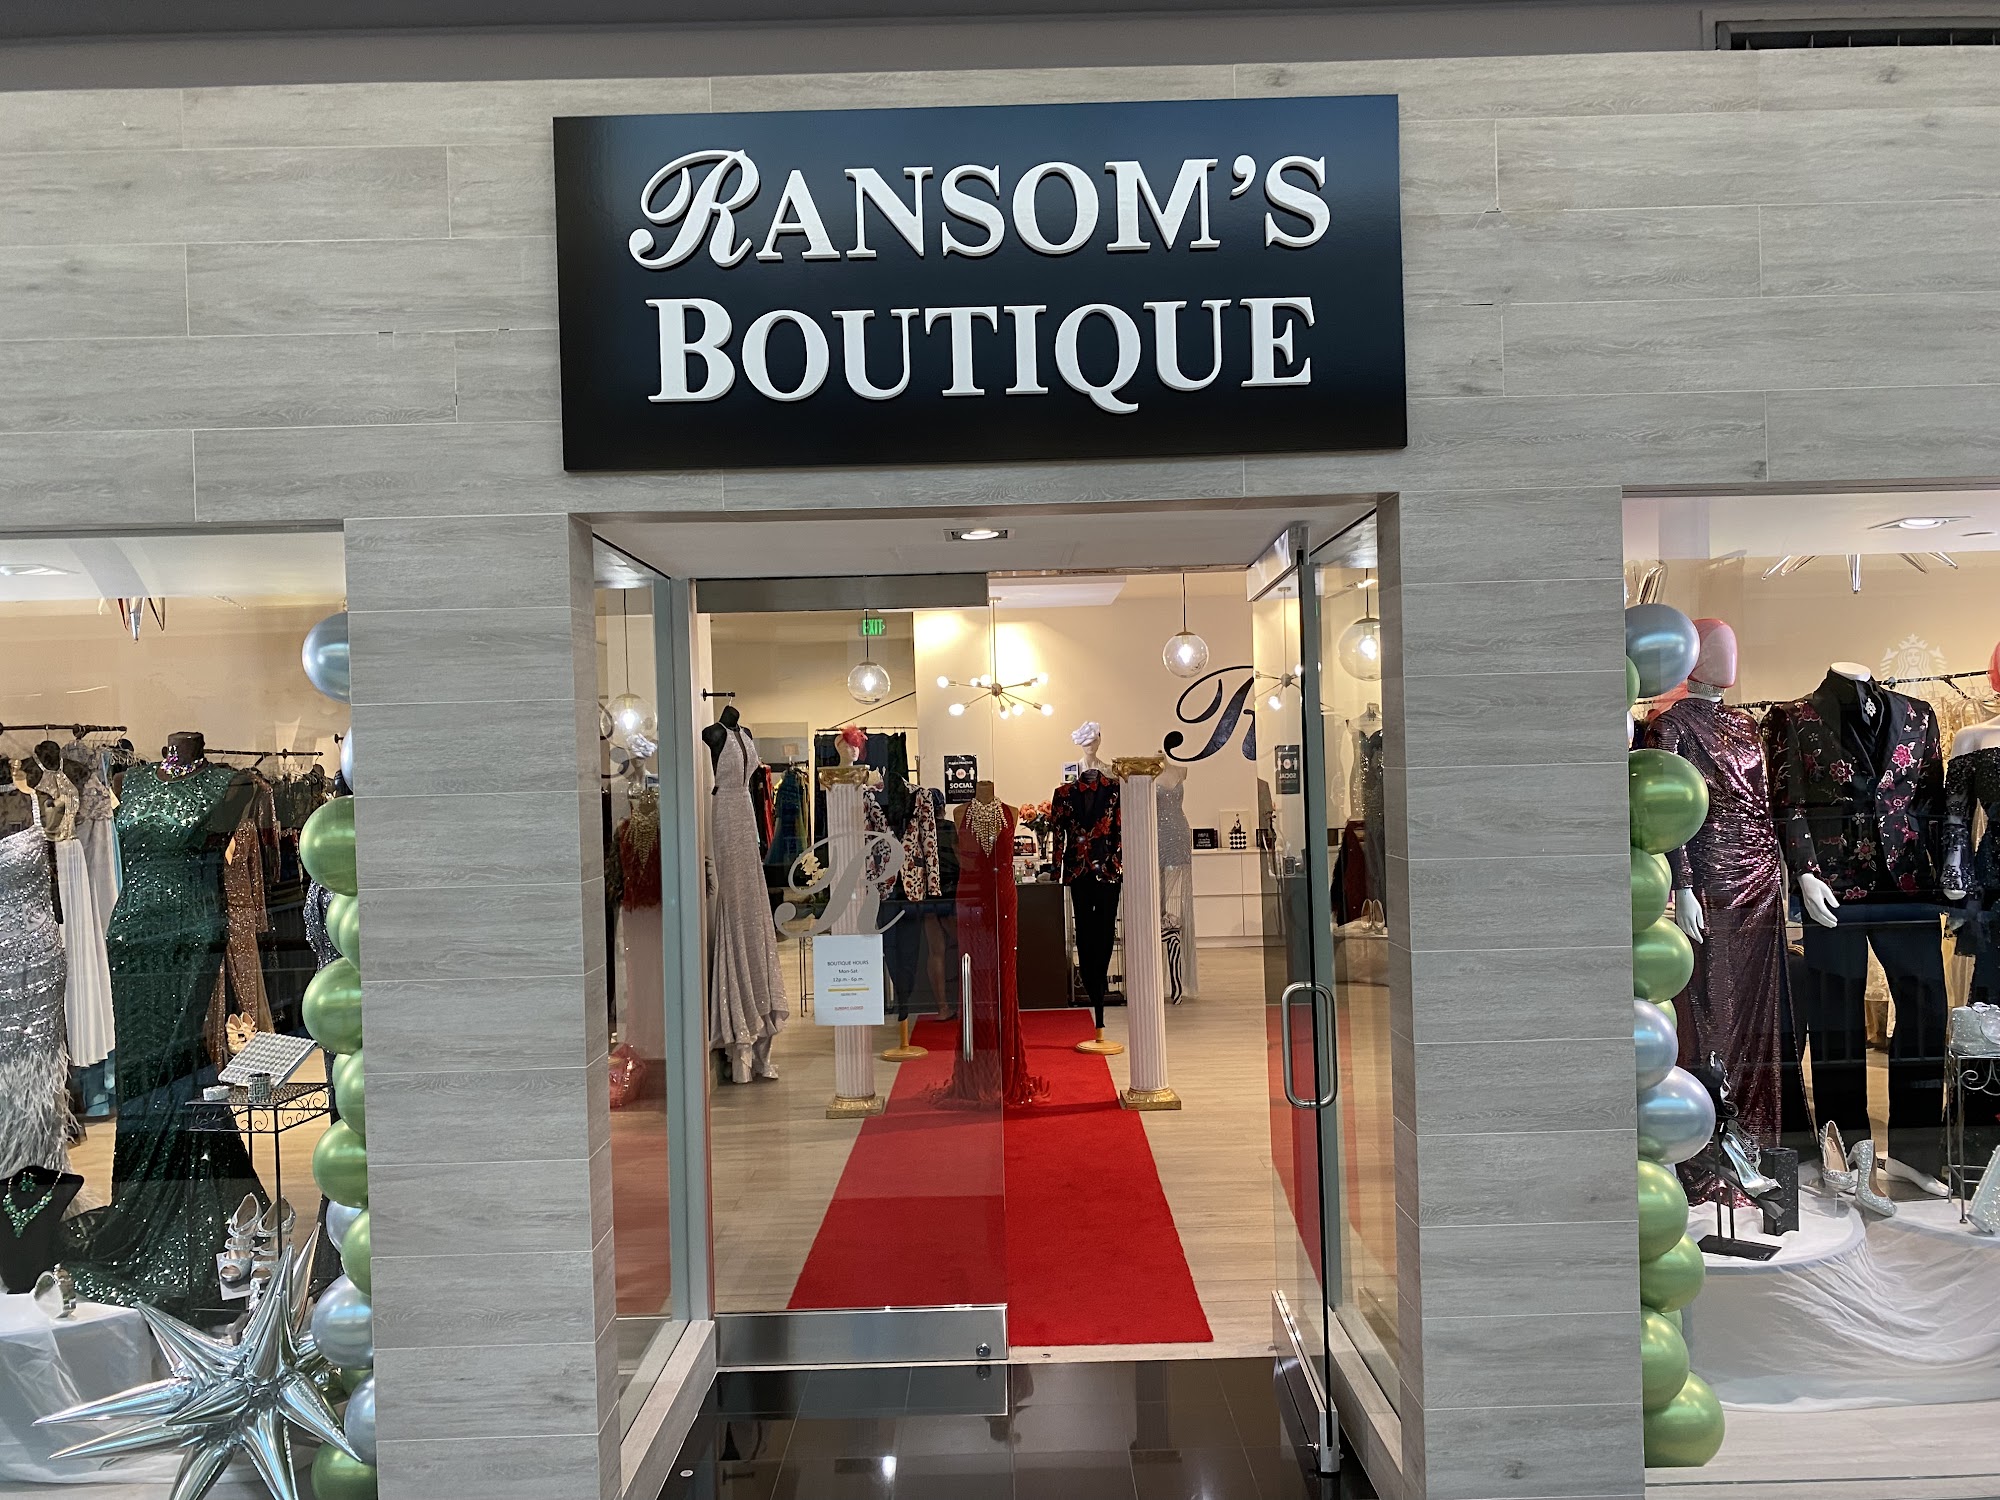 Ransom's Boutique